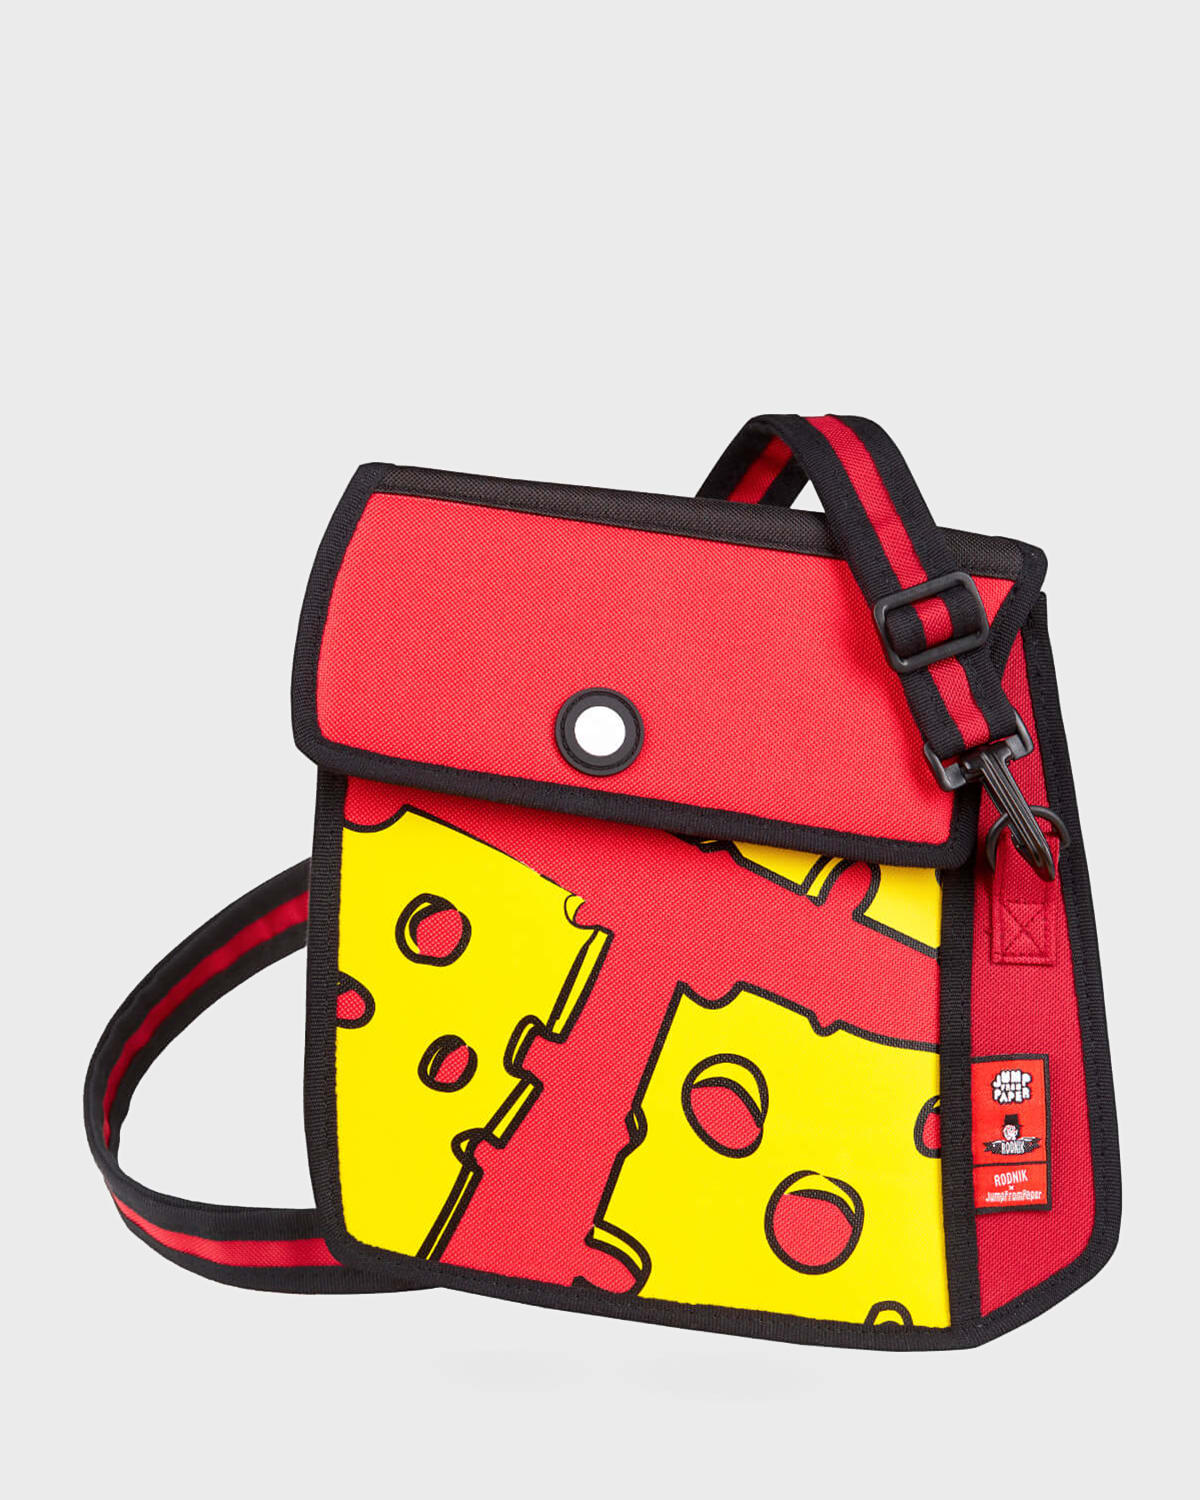 Jump from Paper Kid's Pop Art Cheese Shoulder Bag